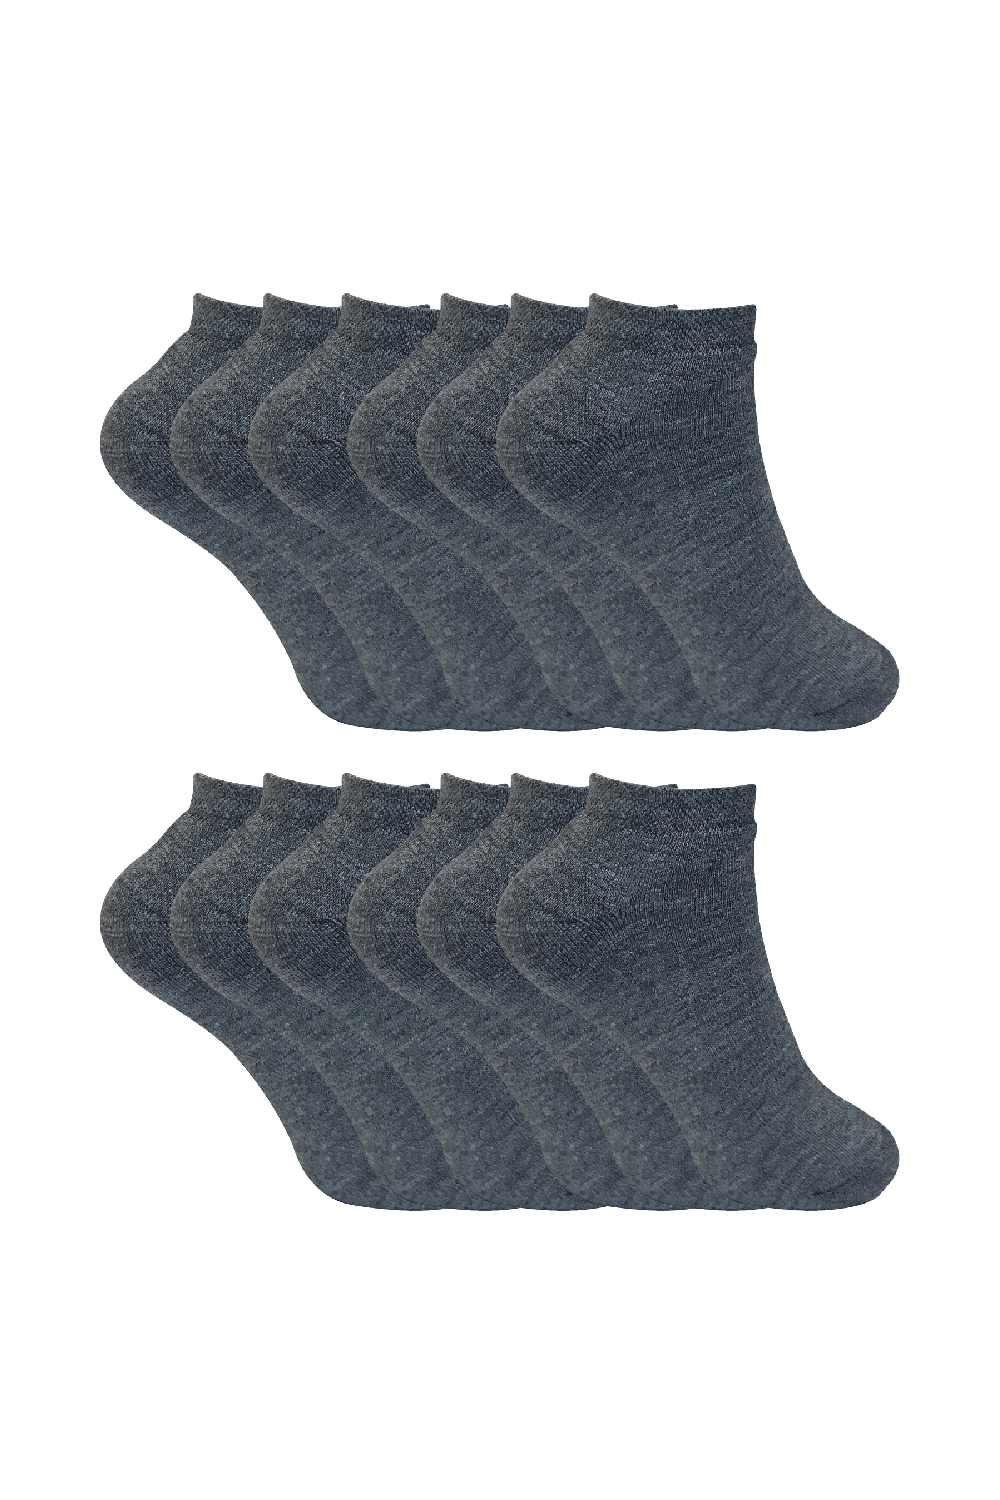 12 Pair Multipack Thick Ankle Thermal Winter Socks